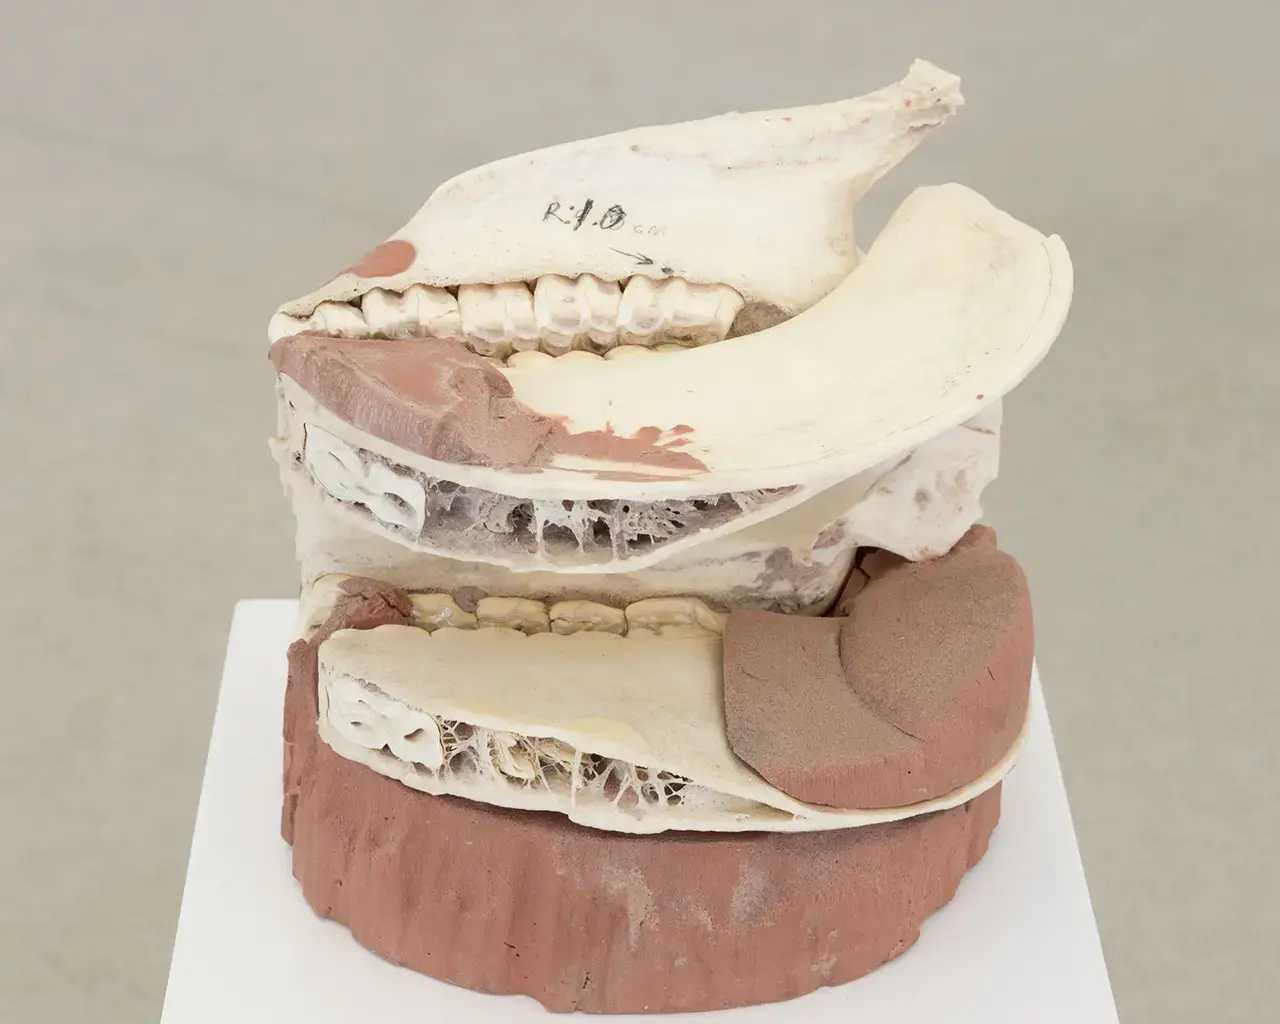 Matthew Angelo Harrison, "Bodily Study of Unthinking Groups," 2016, skull and clay, 41 1/4 x 9 1/5 x 9 1/5 inches. Photo courtesy of the Institute of Contemporary Art.